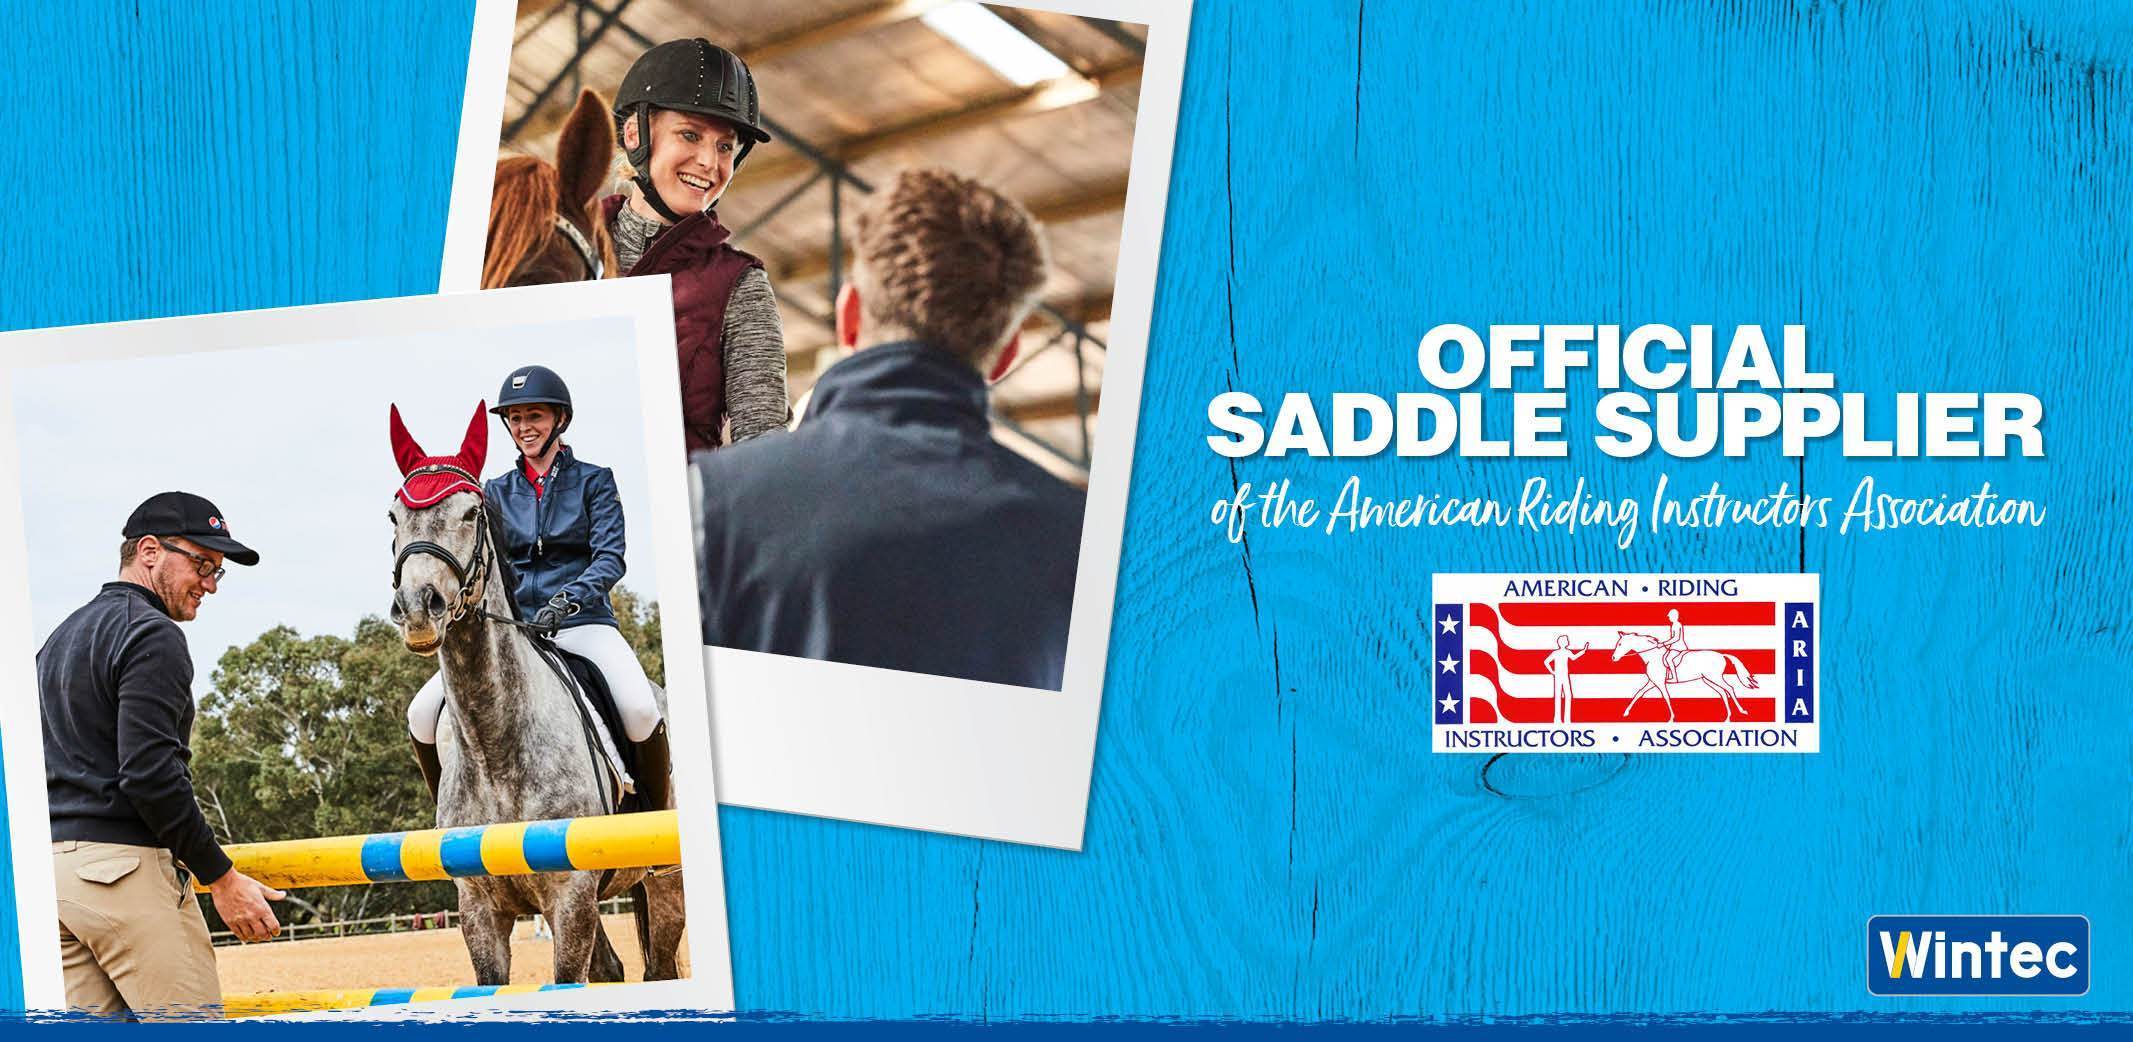 Official Saddle Supplier of the American Riding Instructors Association